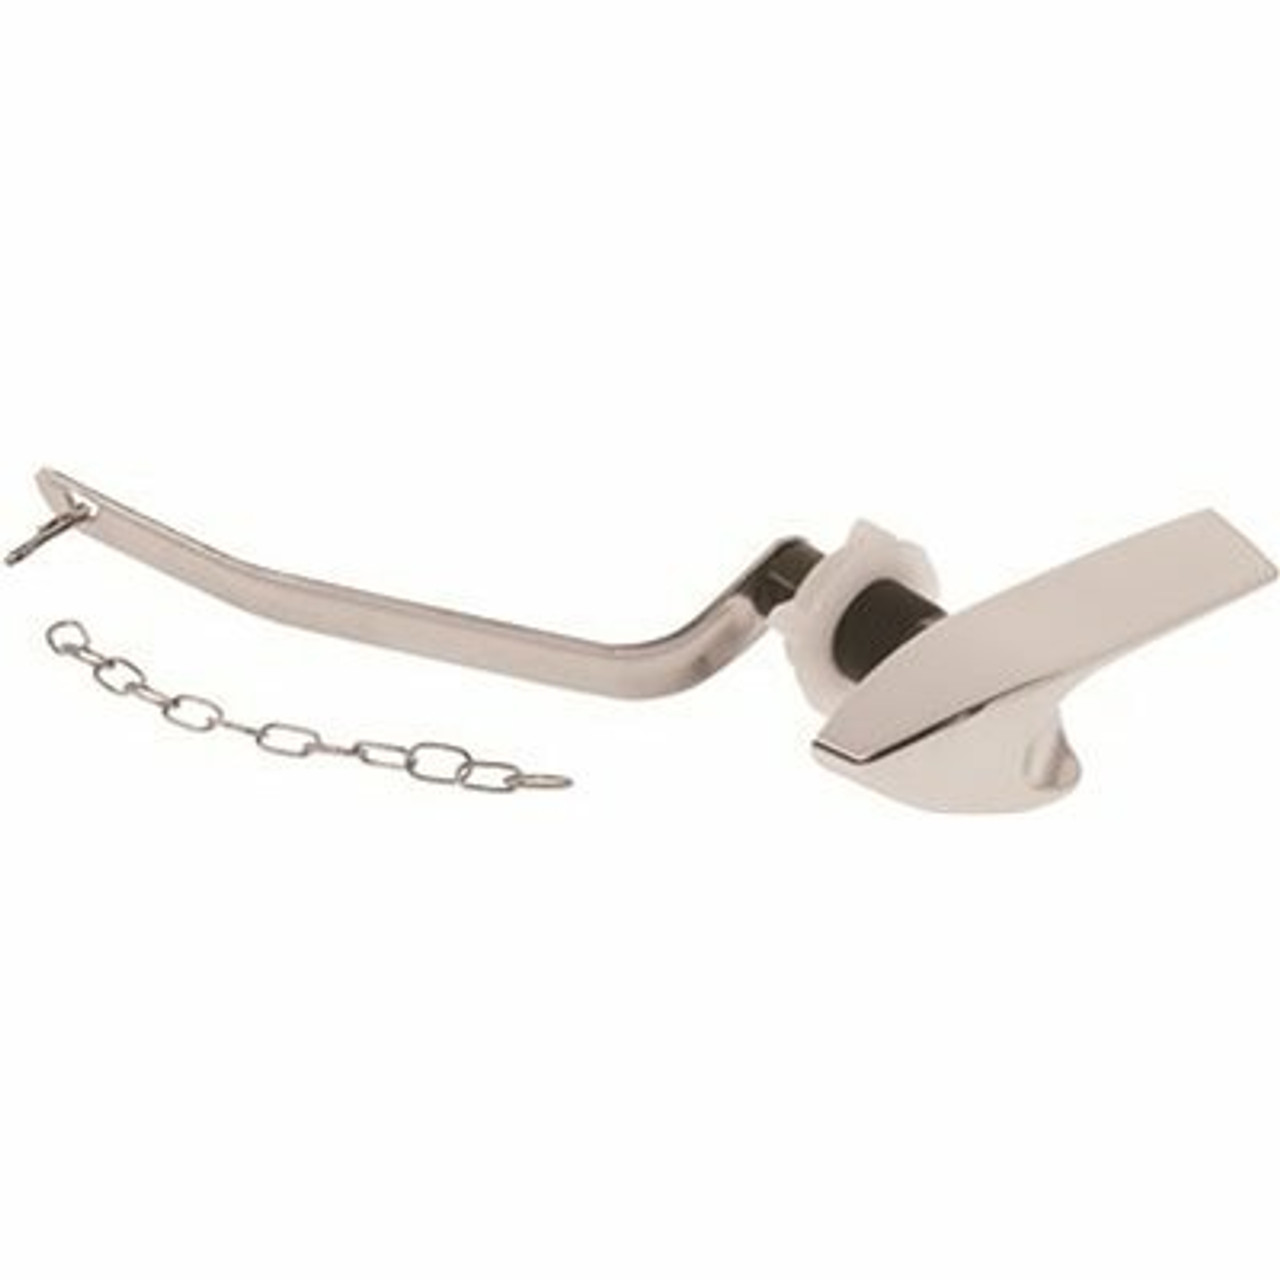 Kohler Wellworth Classic Toilets Trip Lever Service Kit In Polished Chrome